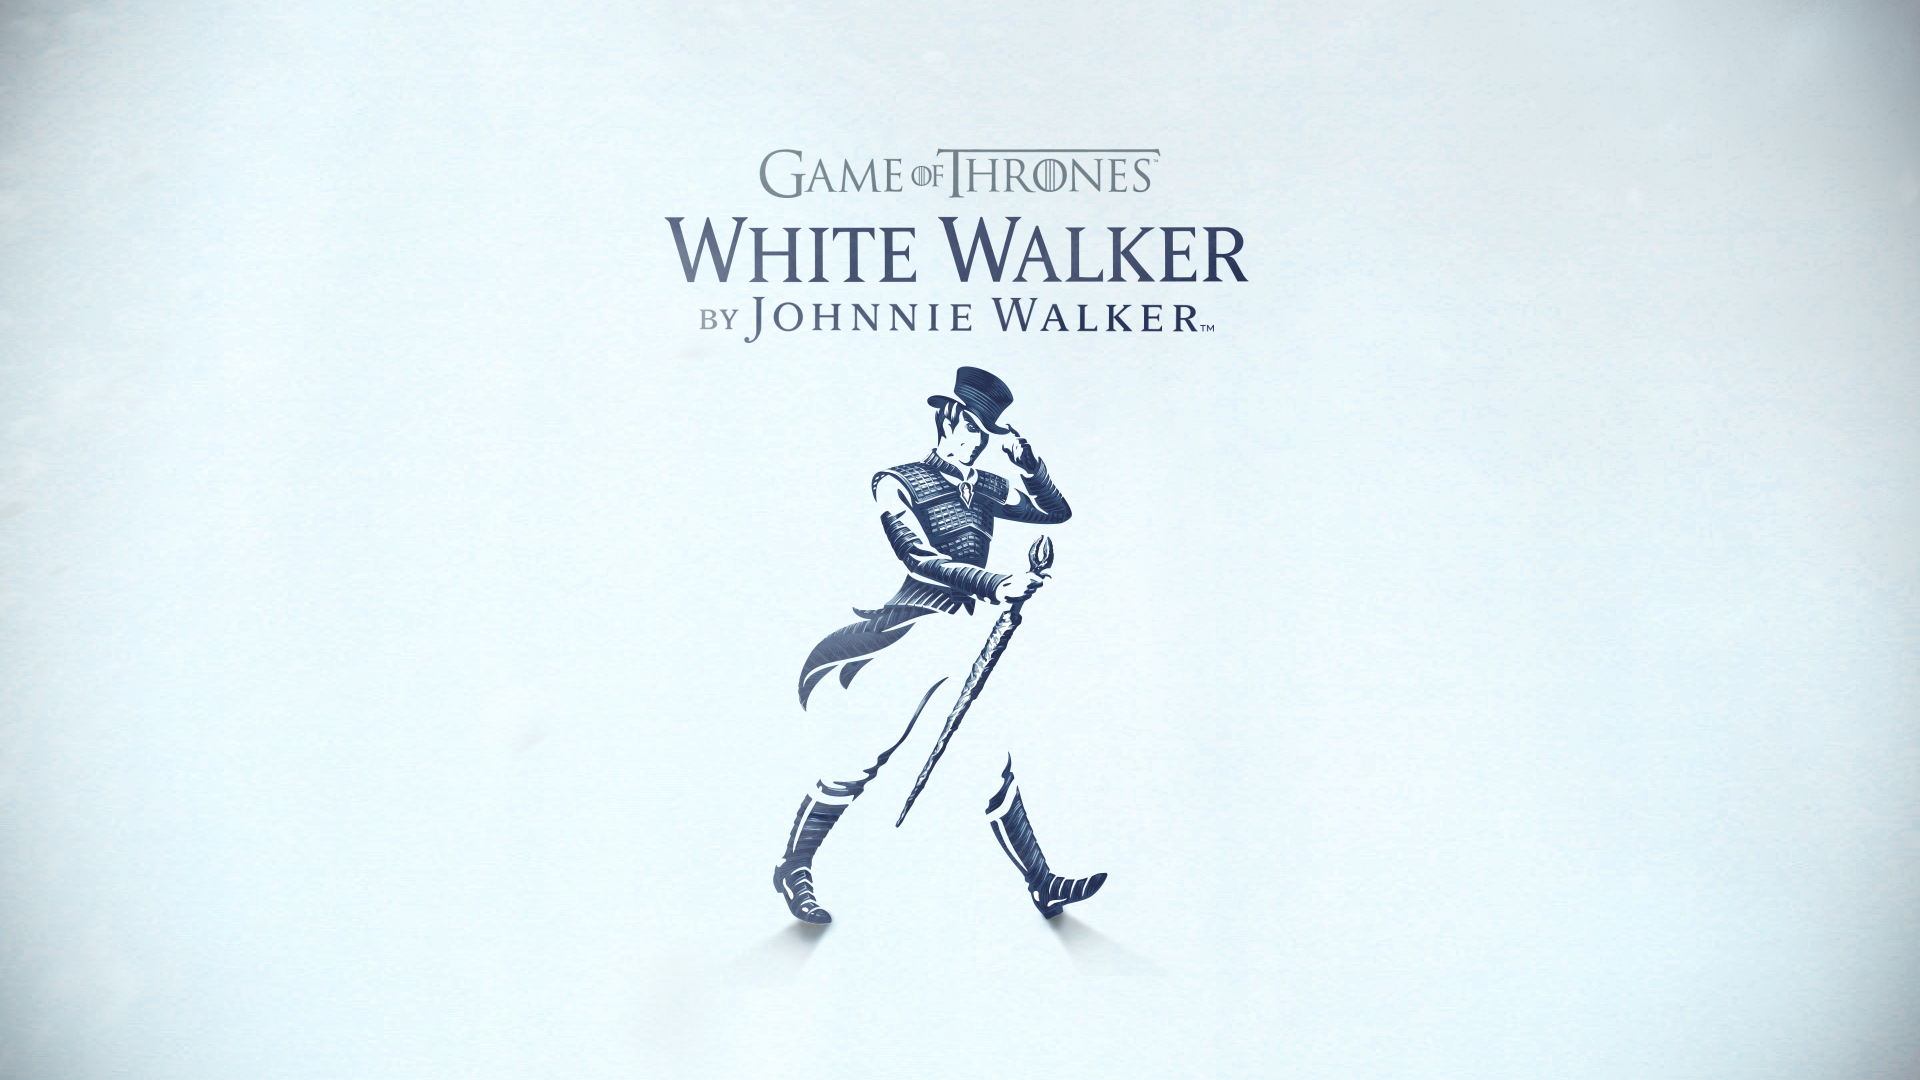 General 1920x1080 whiskey Johnnie Walker Game of Thrones brand TV series alcohol